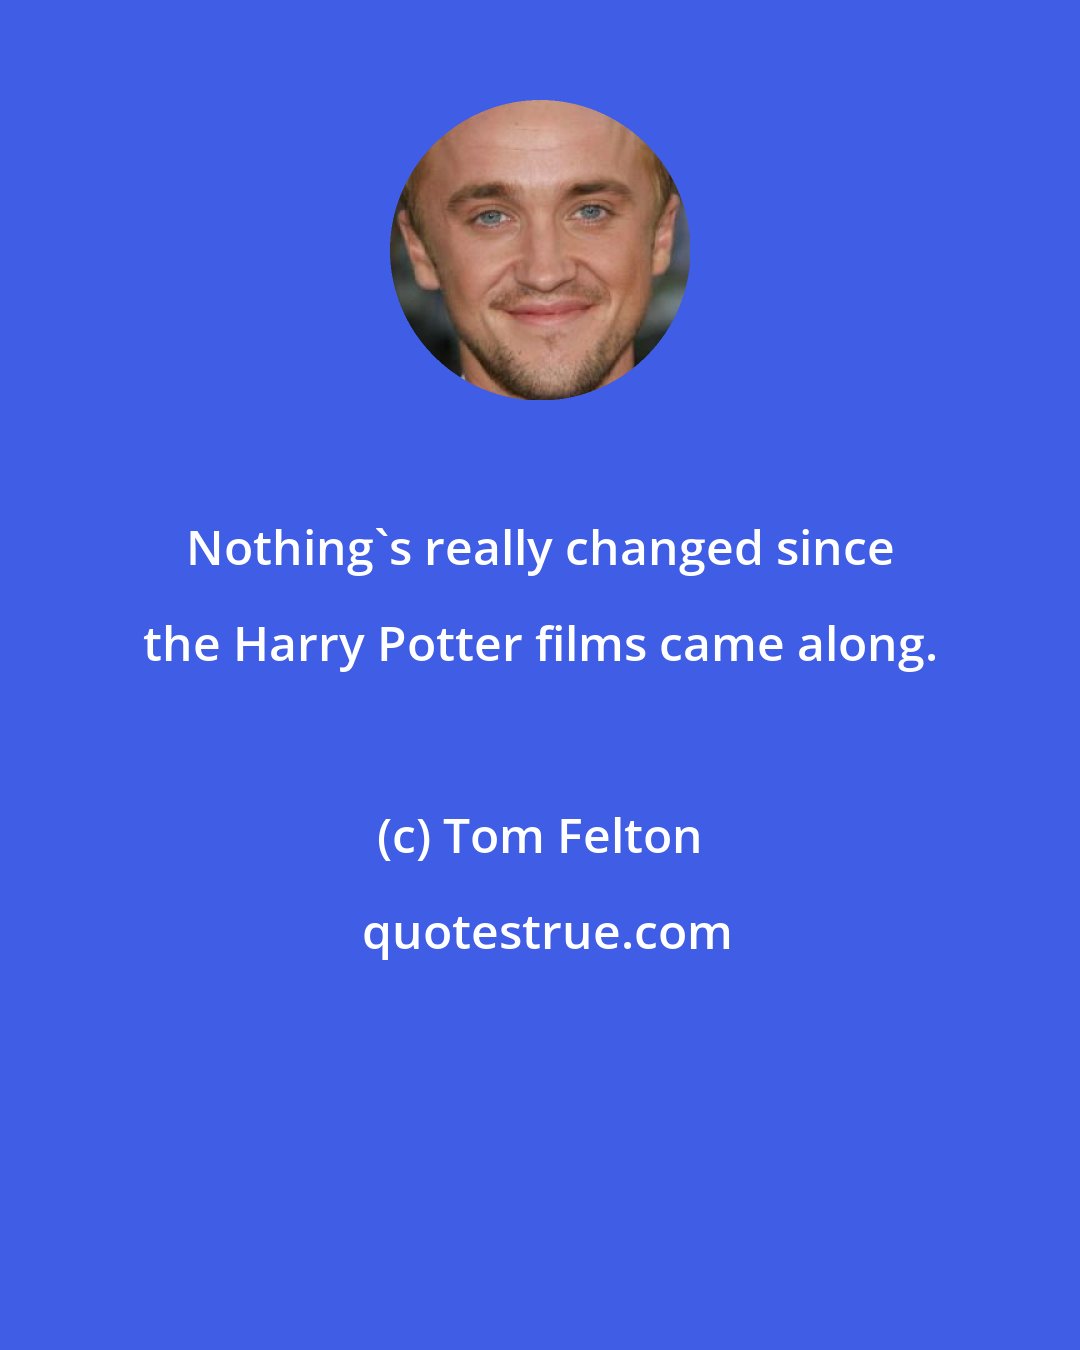 Tom Felton: Nothing's really changed since the Harry Potter films came along.